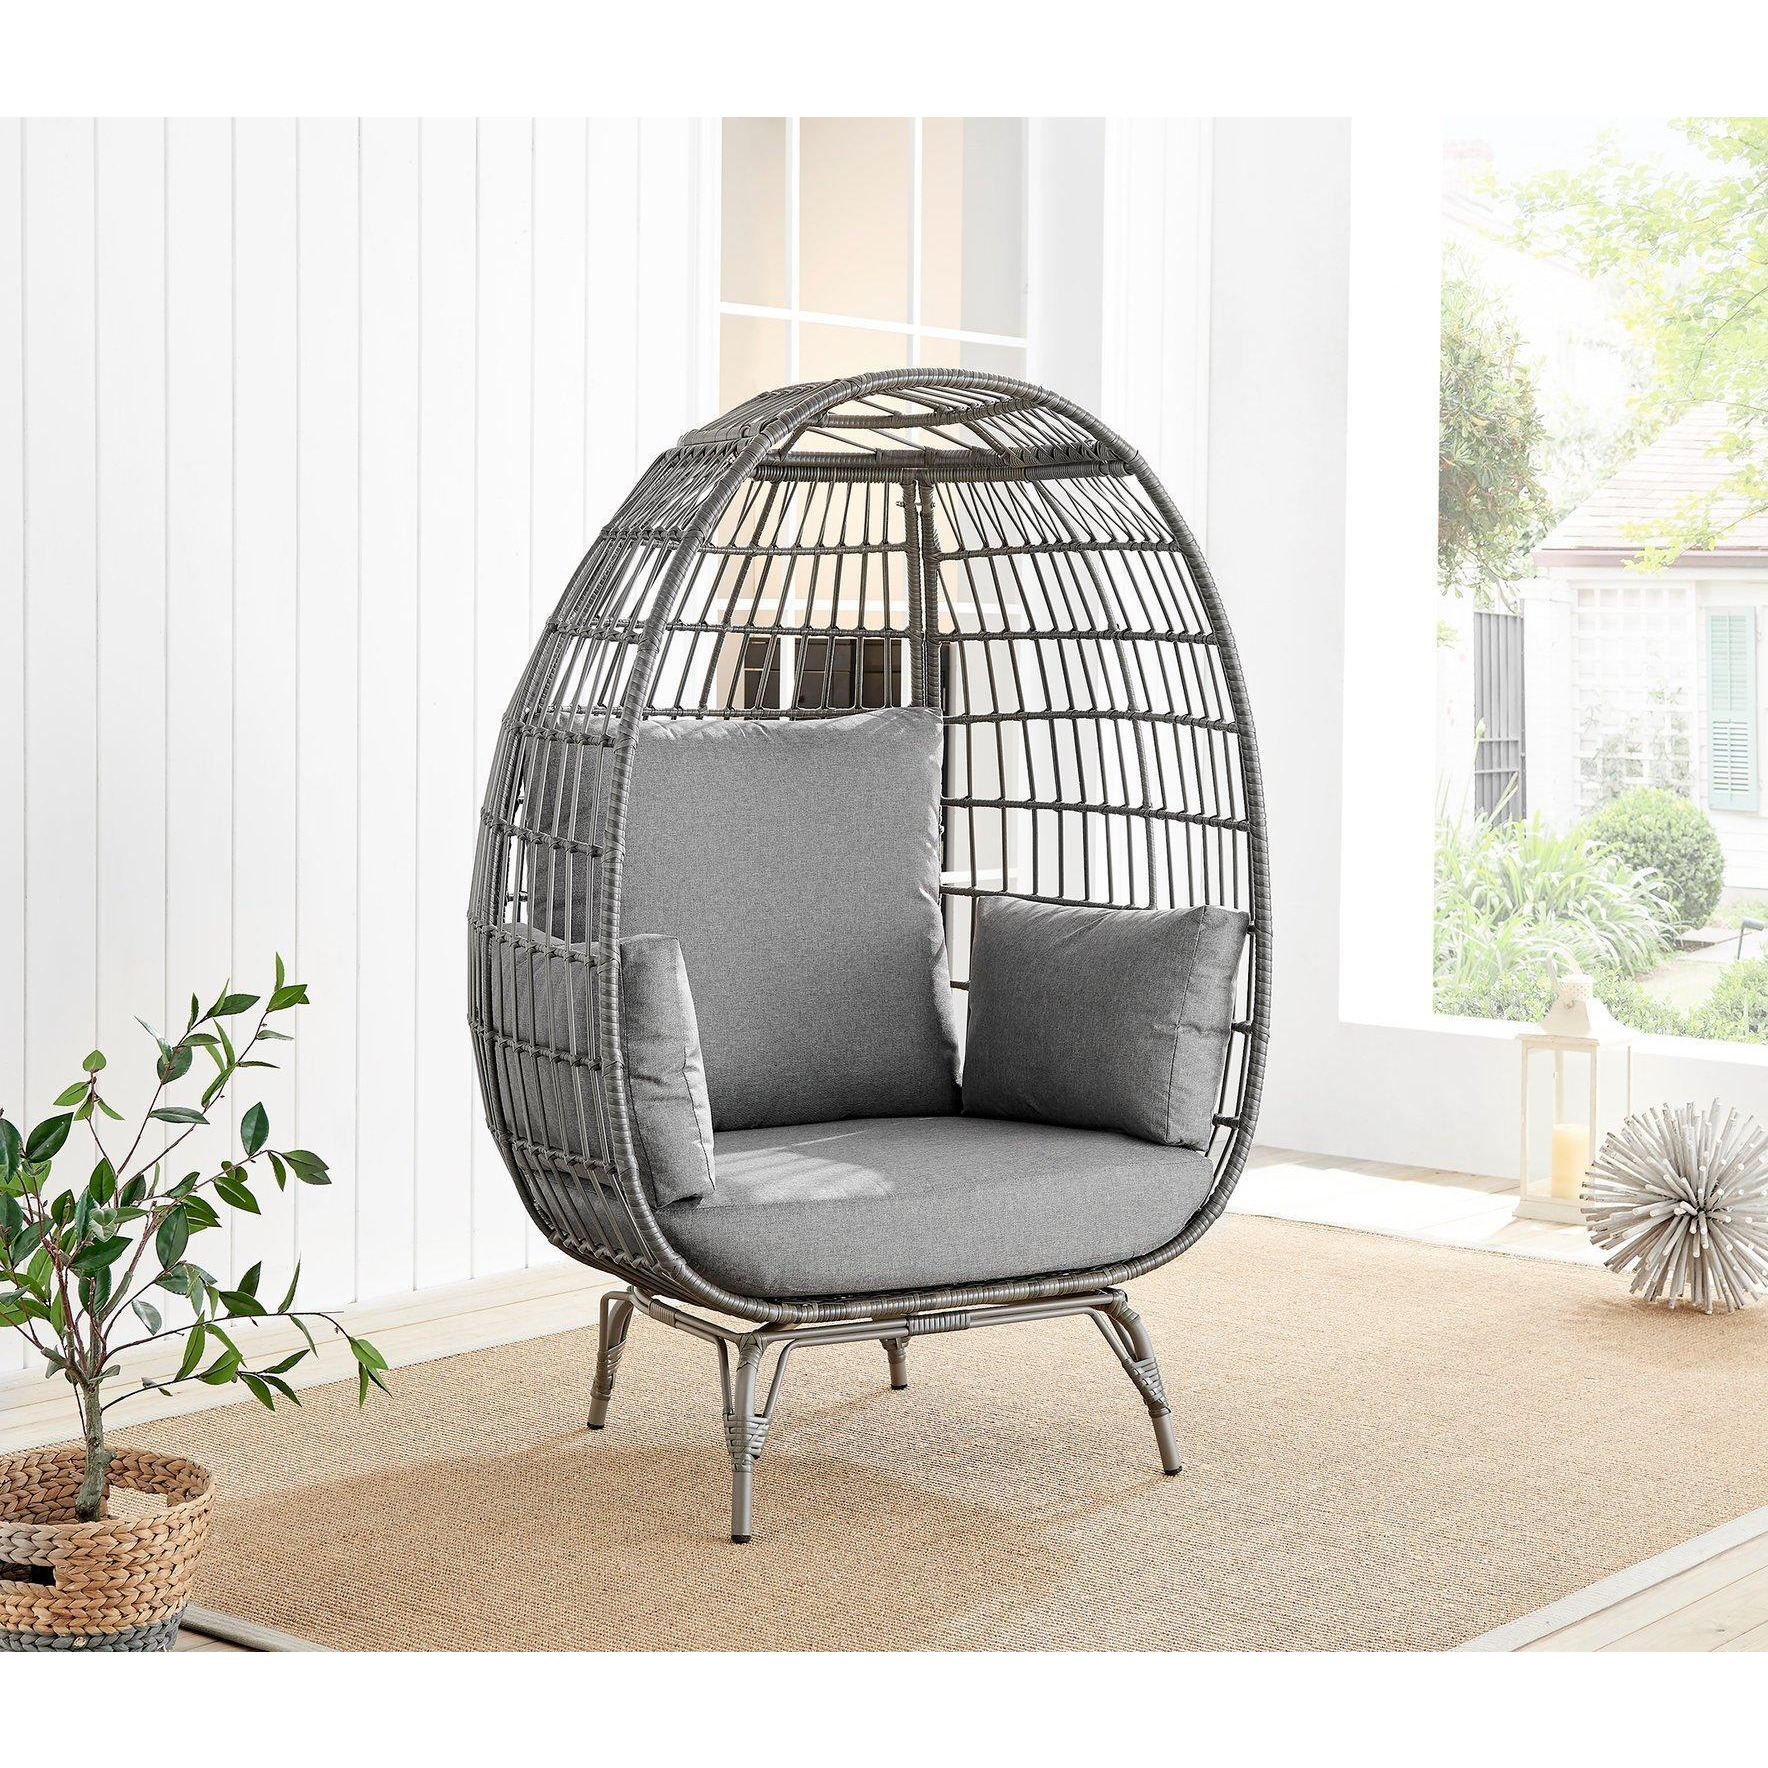 Grey Rattan Garden Egg Chair in PE Resin Rattan for Outdoors and 15cm Luxuriously Thick Cushions - Patio Chair - image 1